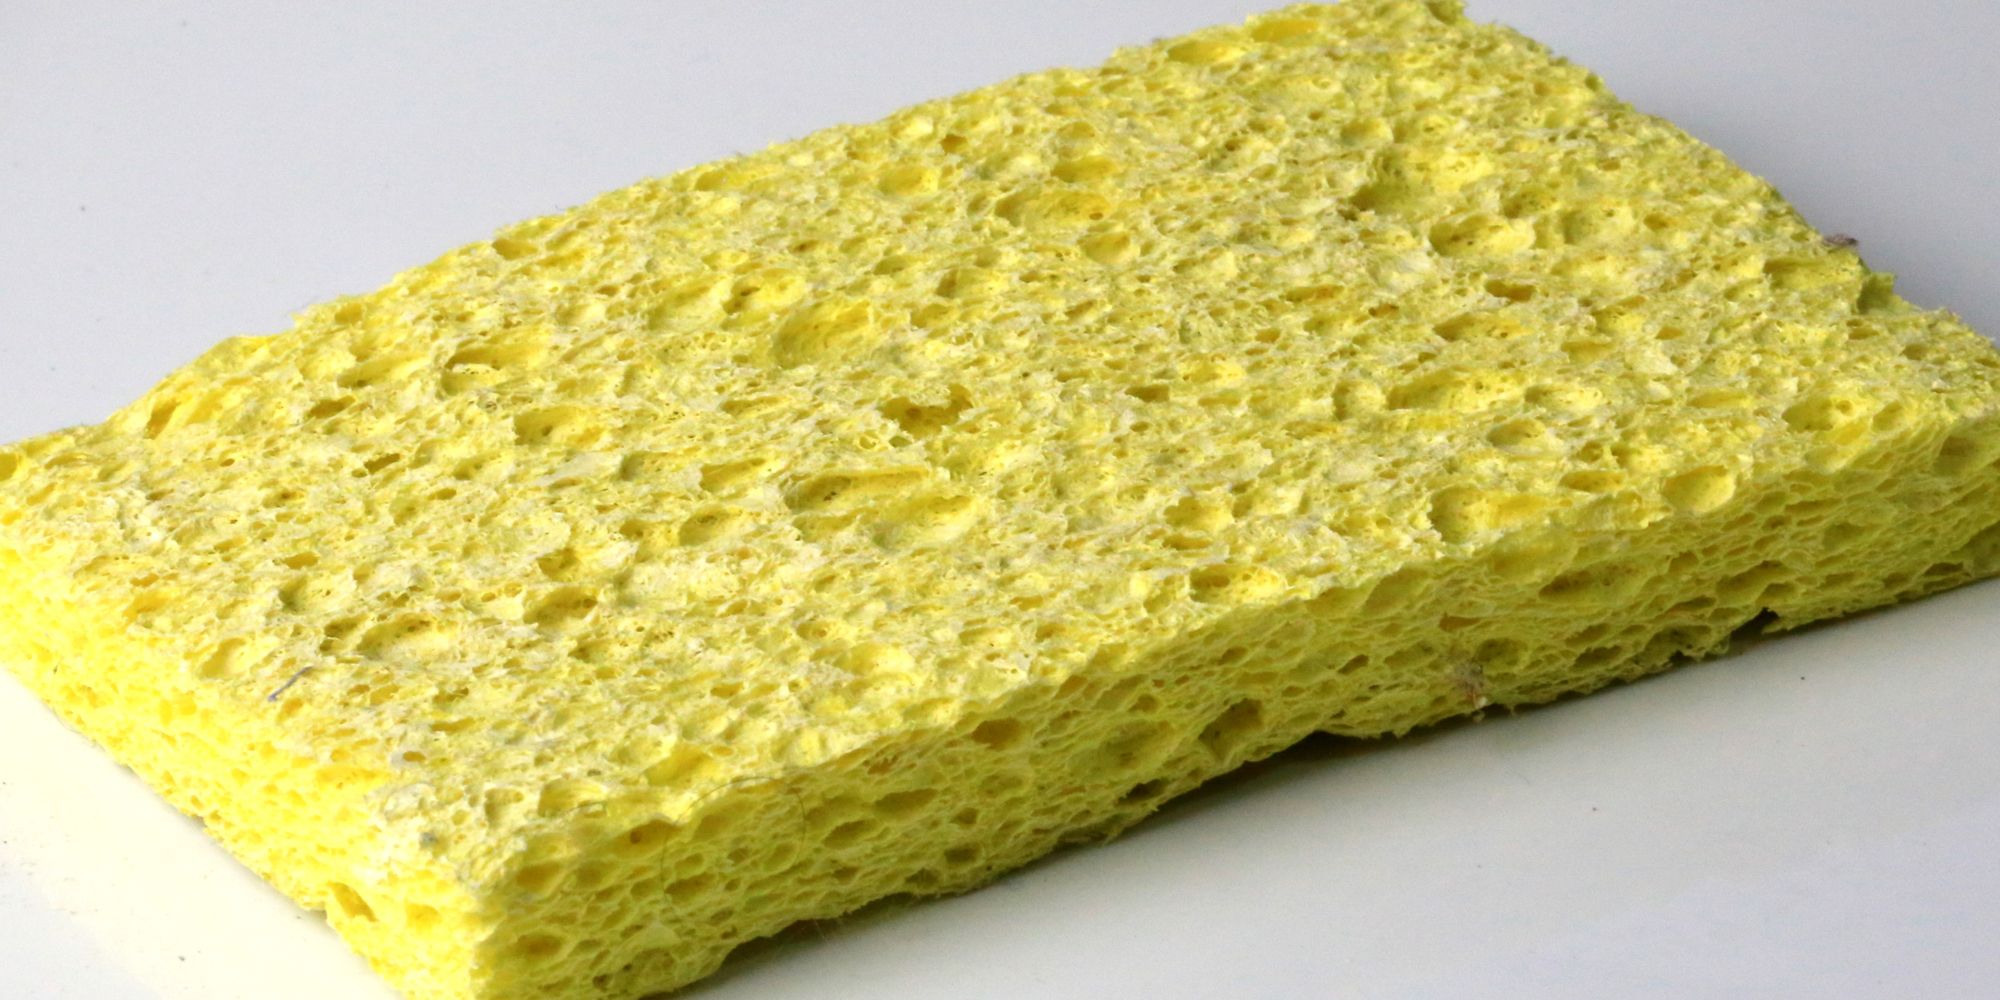 Kitchen Sponge Is Gross and Microwaving 